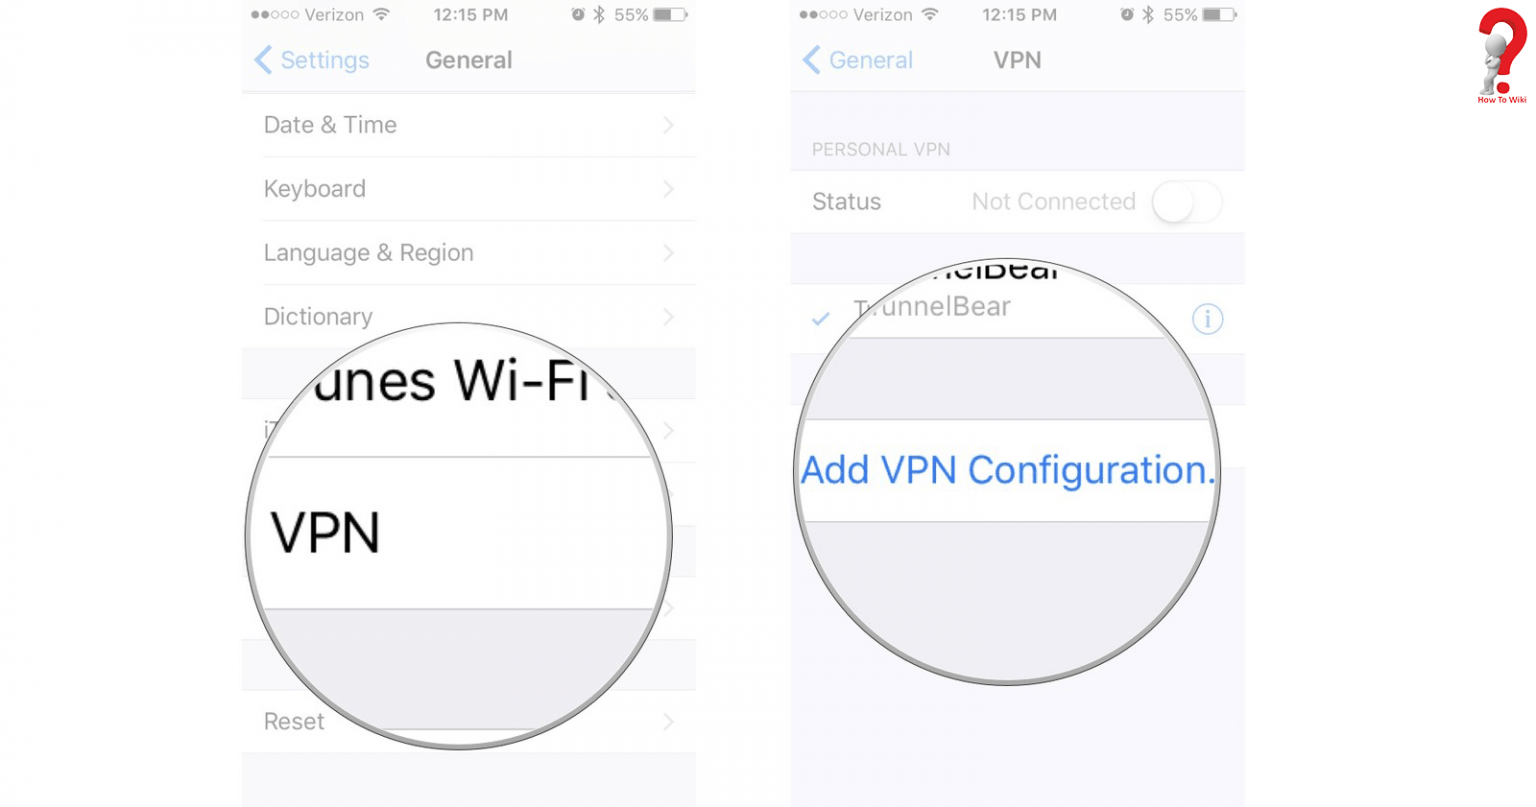 fh koeln vpn iphone what is it